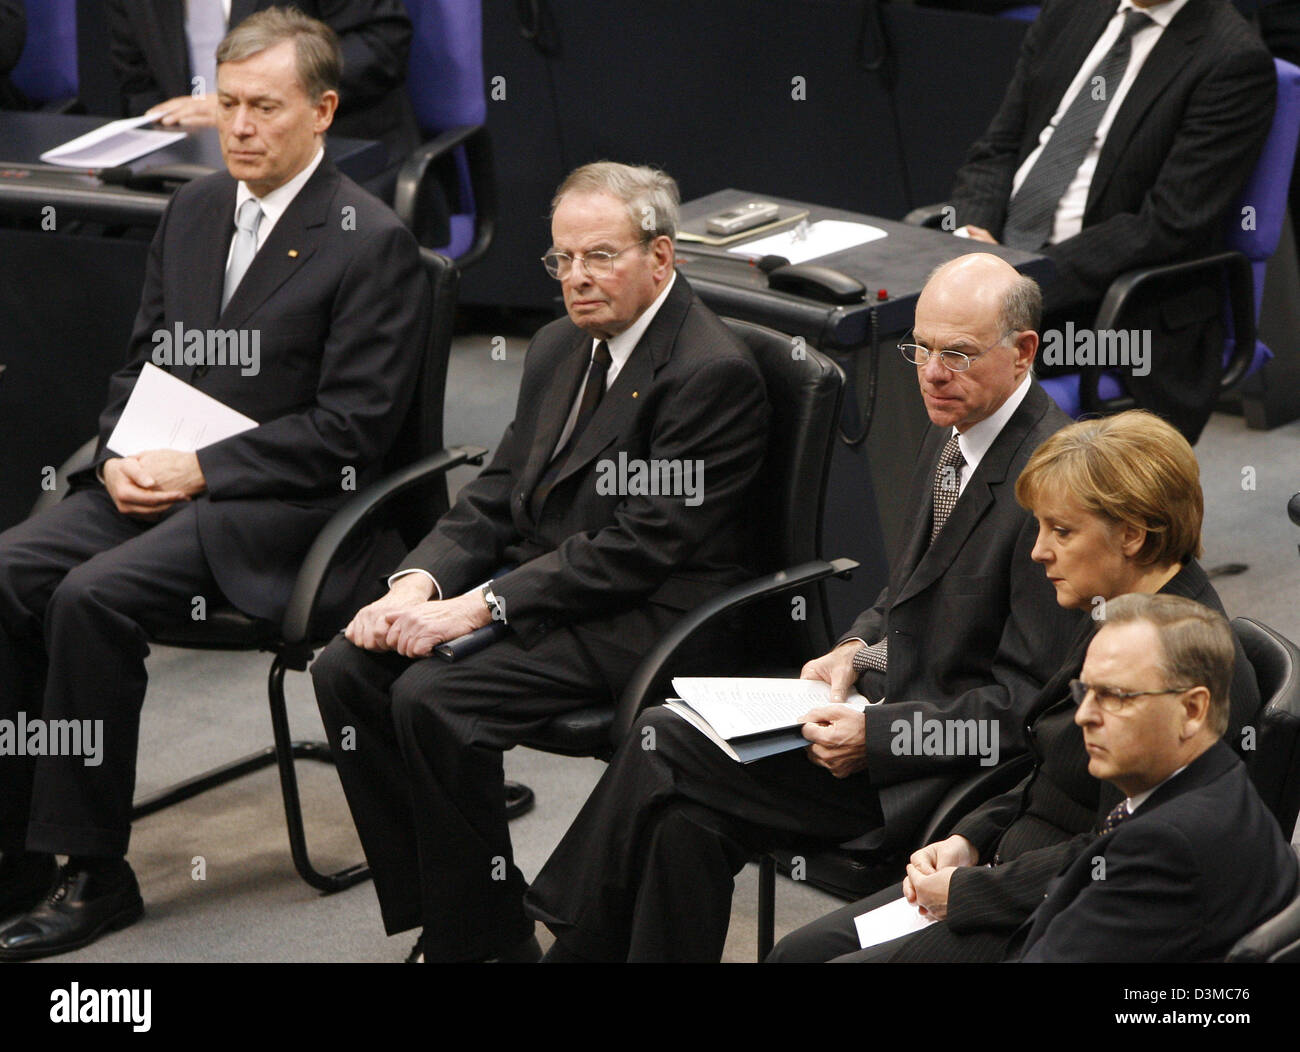 German President Horts Koehler, publicist and Holocaust survivor Ernst Cramer, President of the Bundestag Norbert Lammert, Federal Chancellor Angela Merkel and President of the Federal Constitutional Court Hans-Juergen Papier (L-R) sit in the plenar hall of the Reichstag building in Berlin, Germany, Friday 27 January 2006. The German Bundestag commemorated the victims of National S Stock Photo